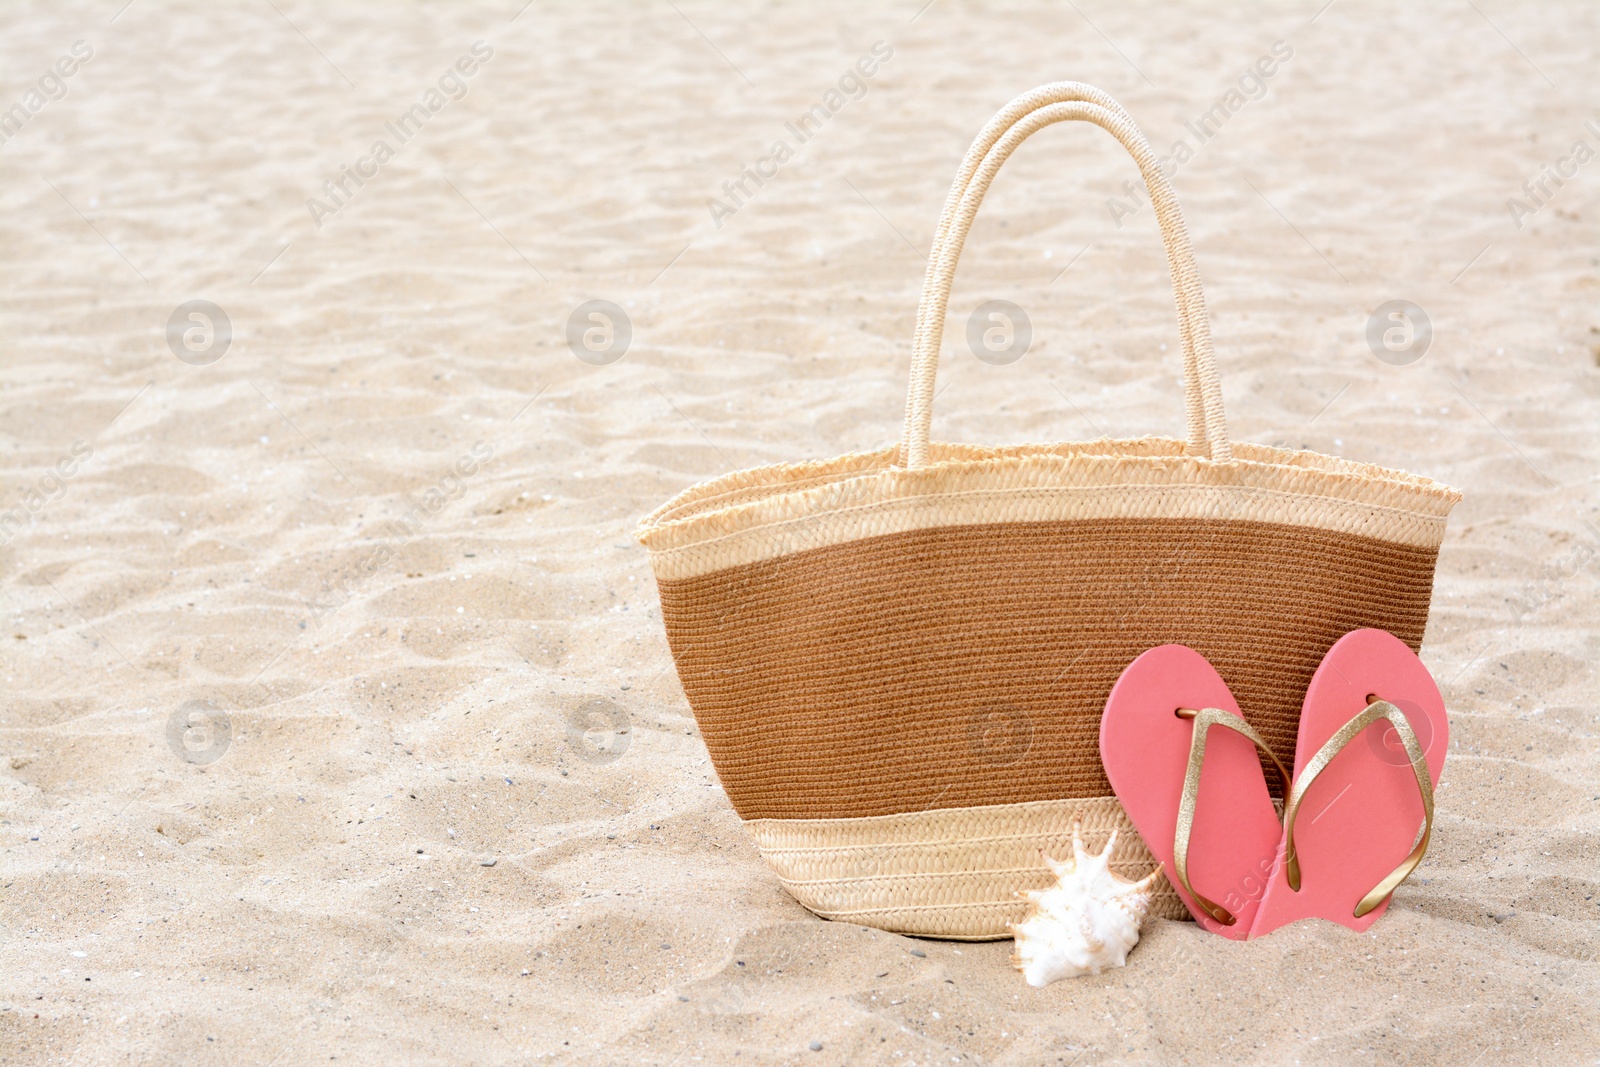 Photo of Stylish straw bag, flip flops and seashell on sand outdoors, space for text. Beach accessories